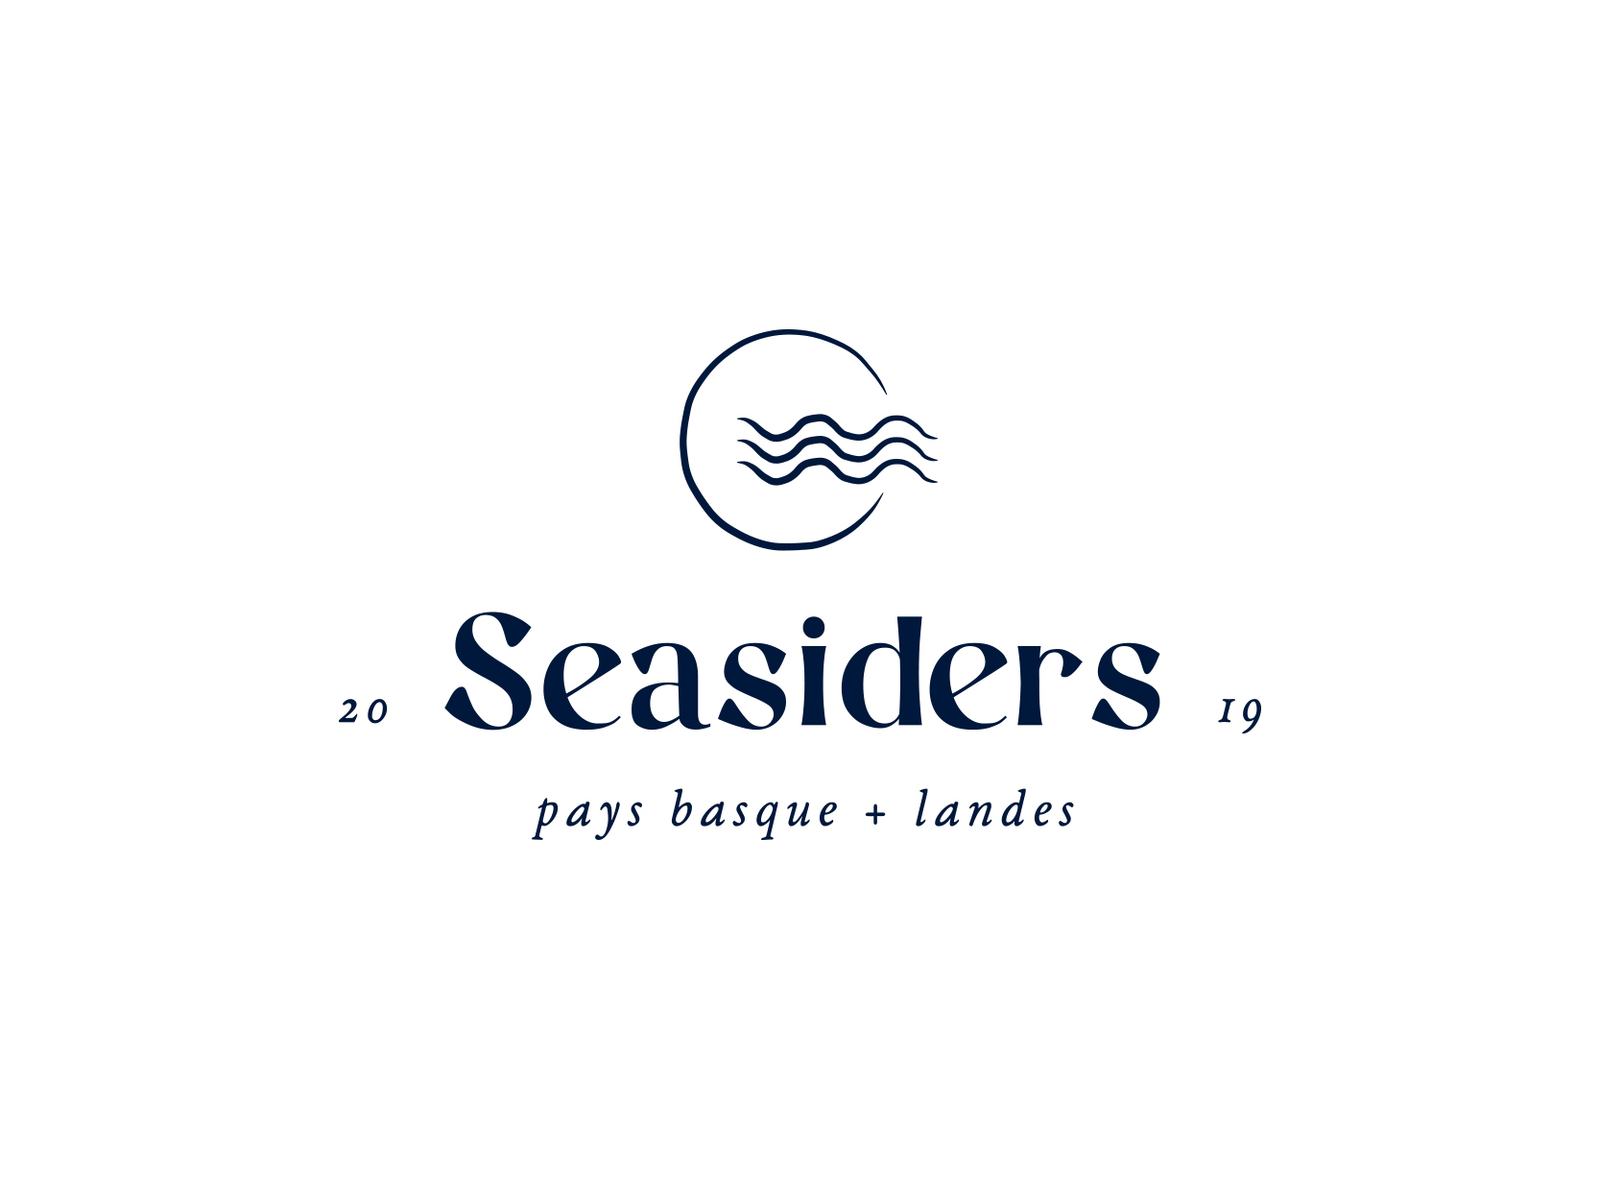 Seasiders Logo by Lucie Archambault on Dribbble